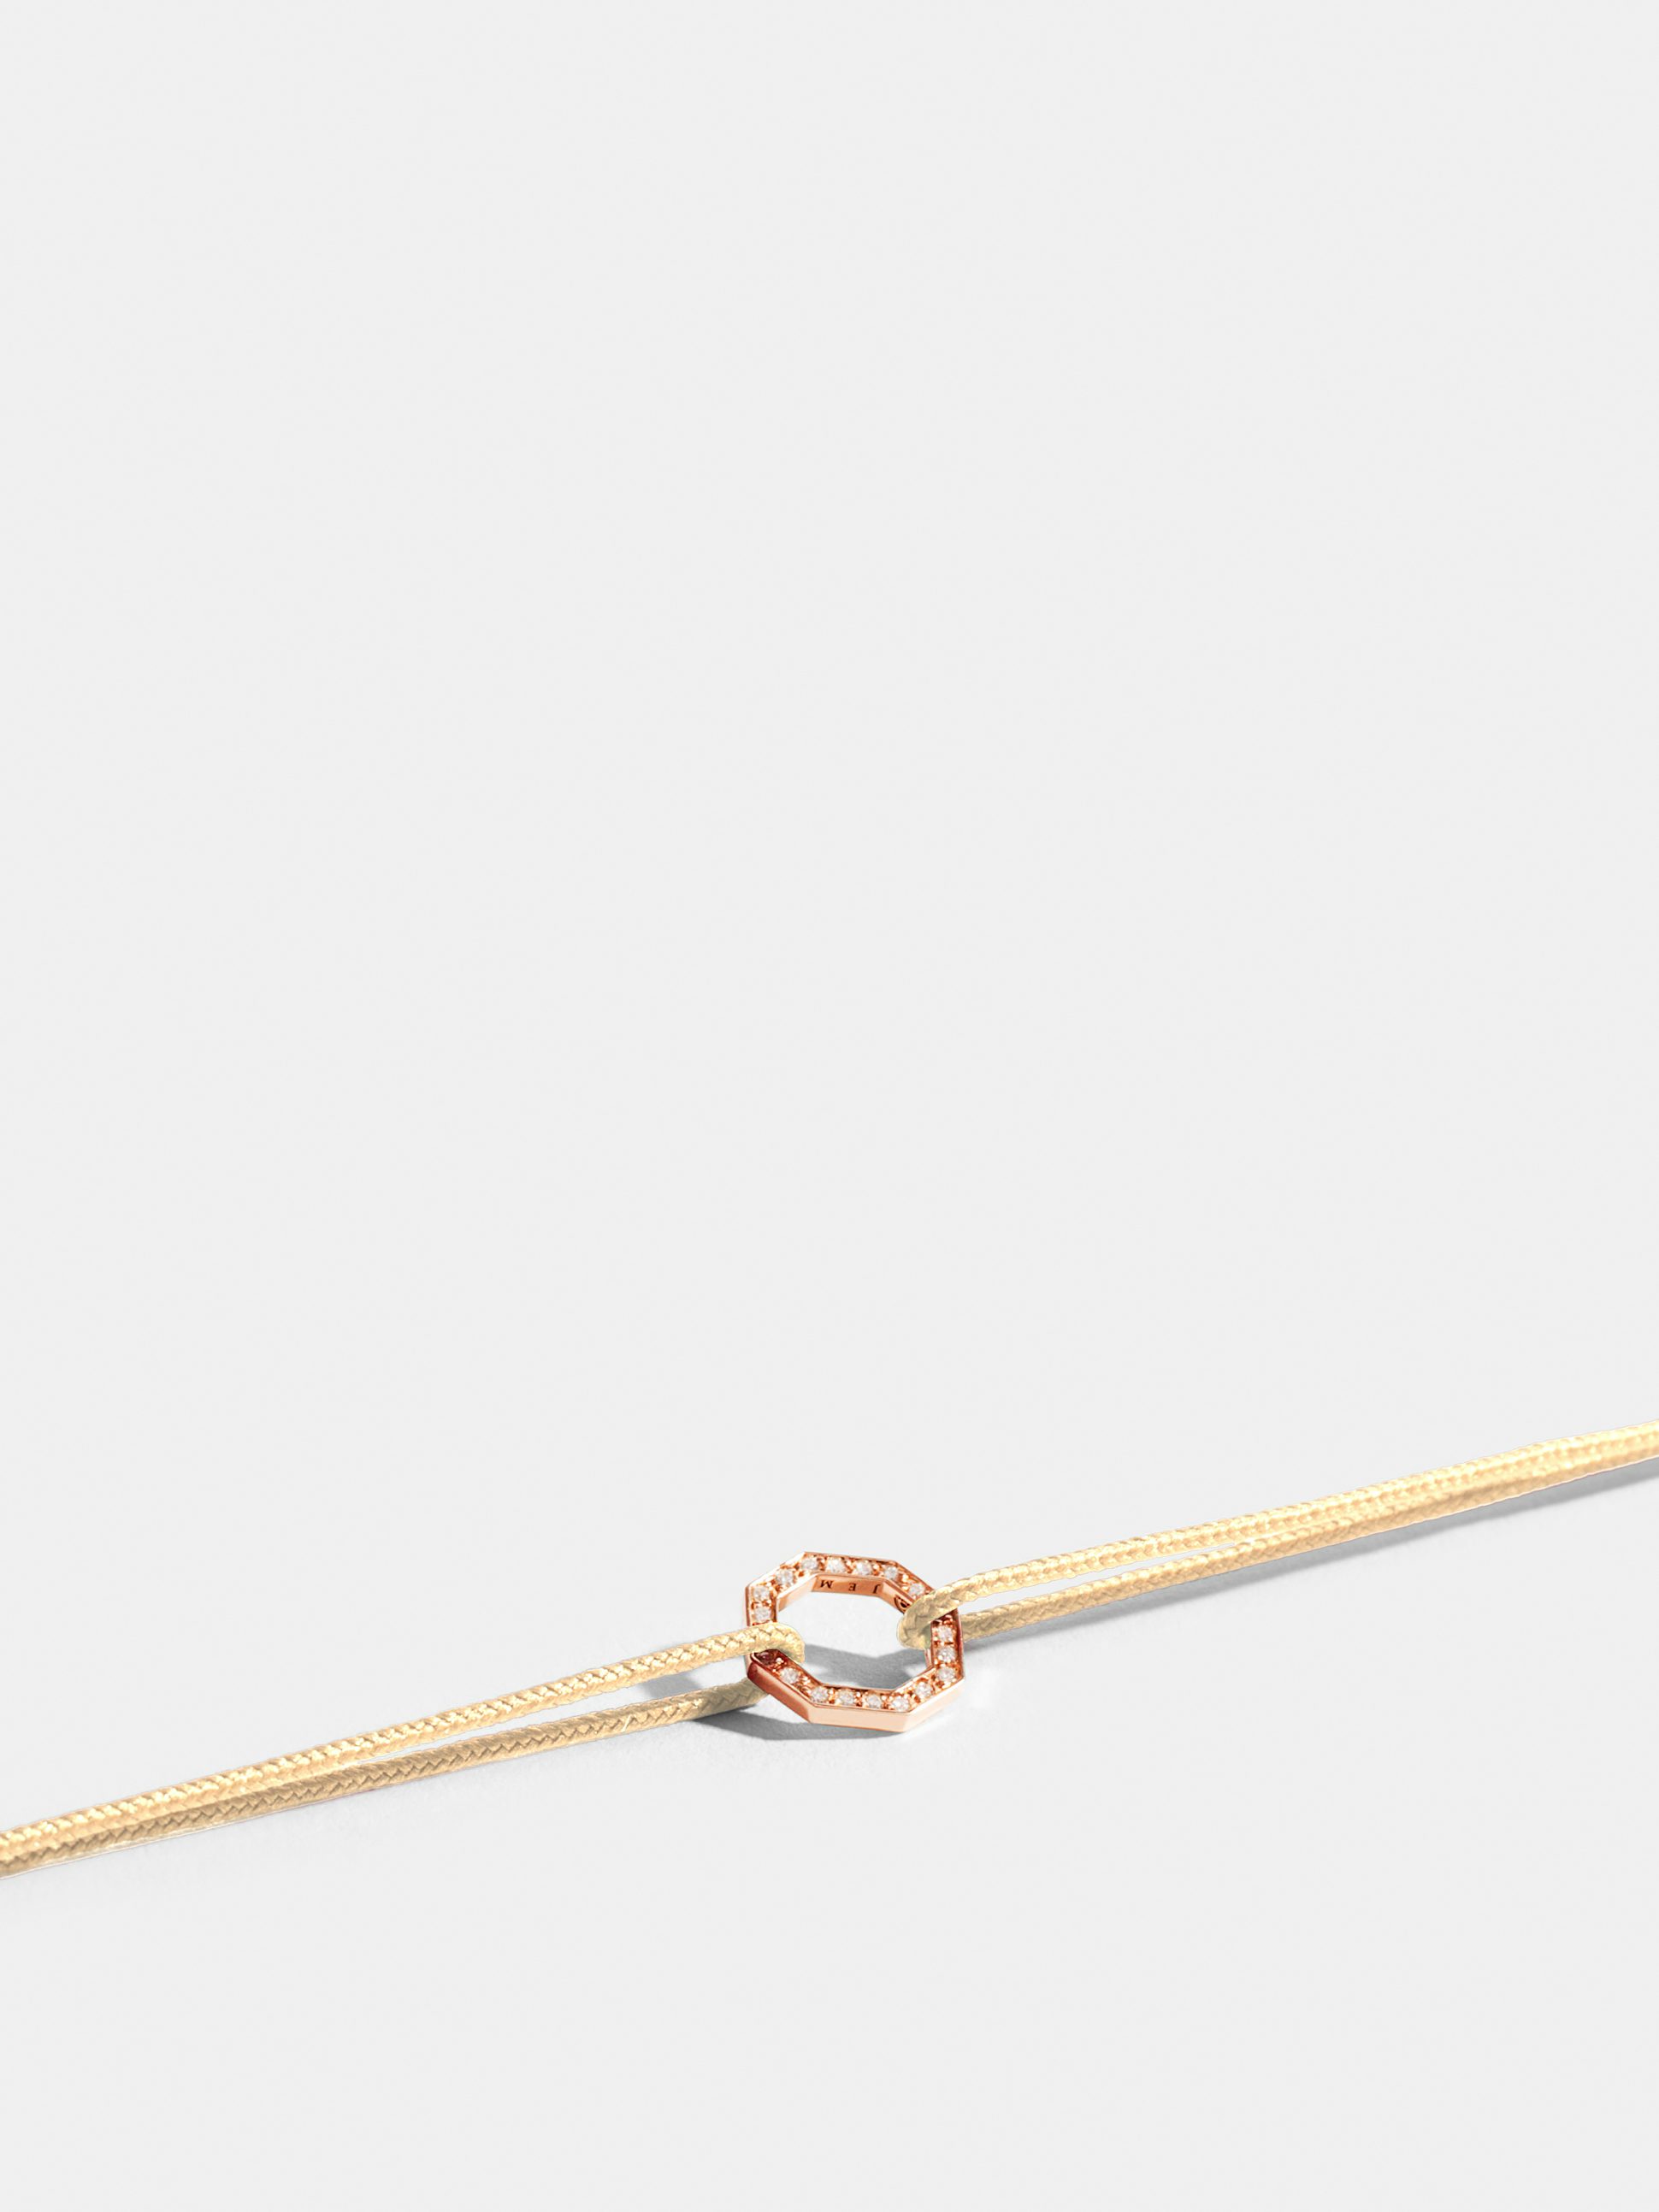 Octogone motif in 18k Fairmined ethical yellow gold, paved with lab-grown diamonds, on a ivory white cord.